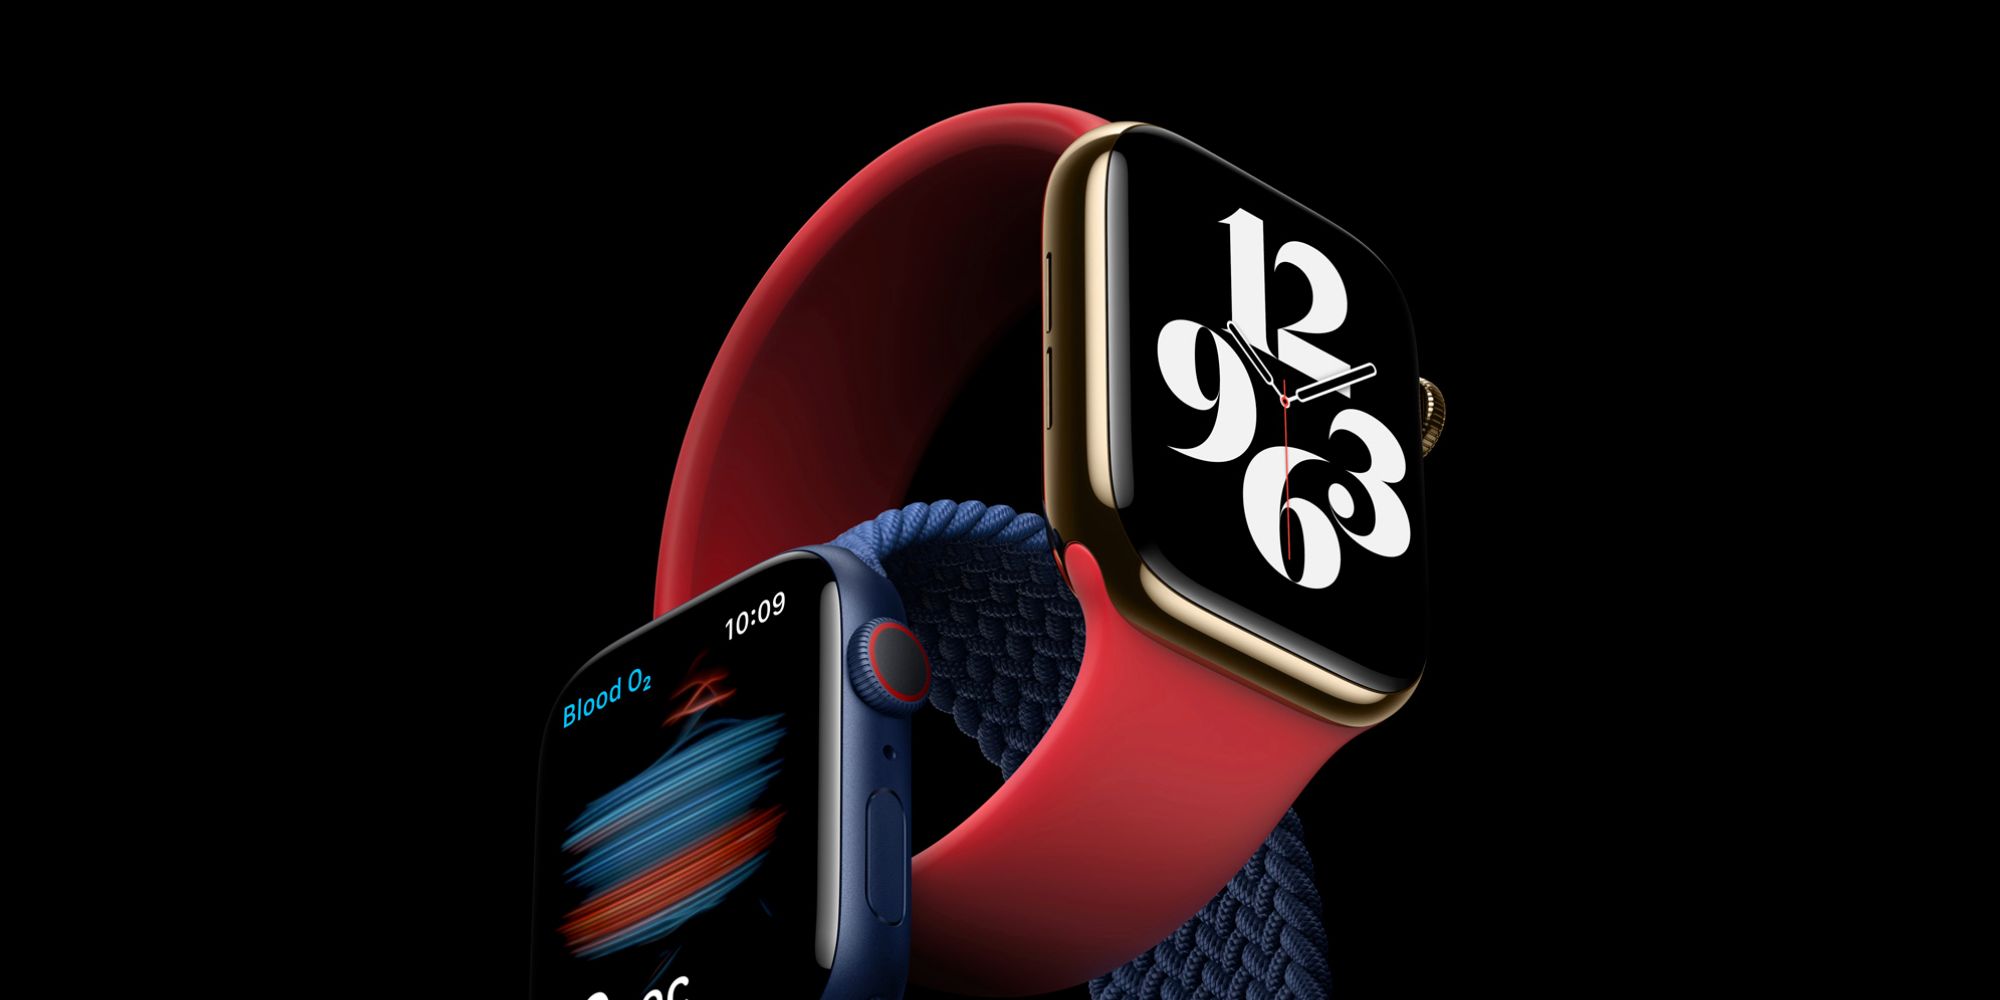 Apple Watch Series 6 official product render